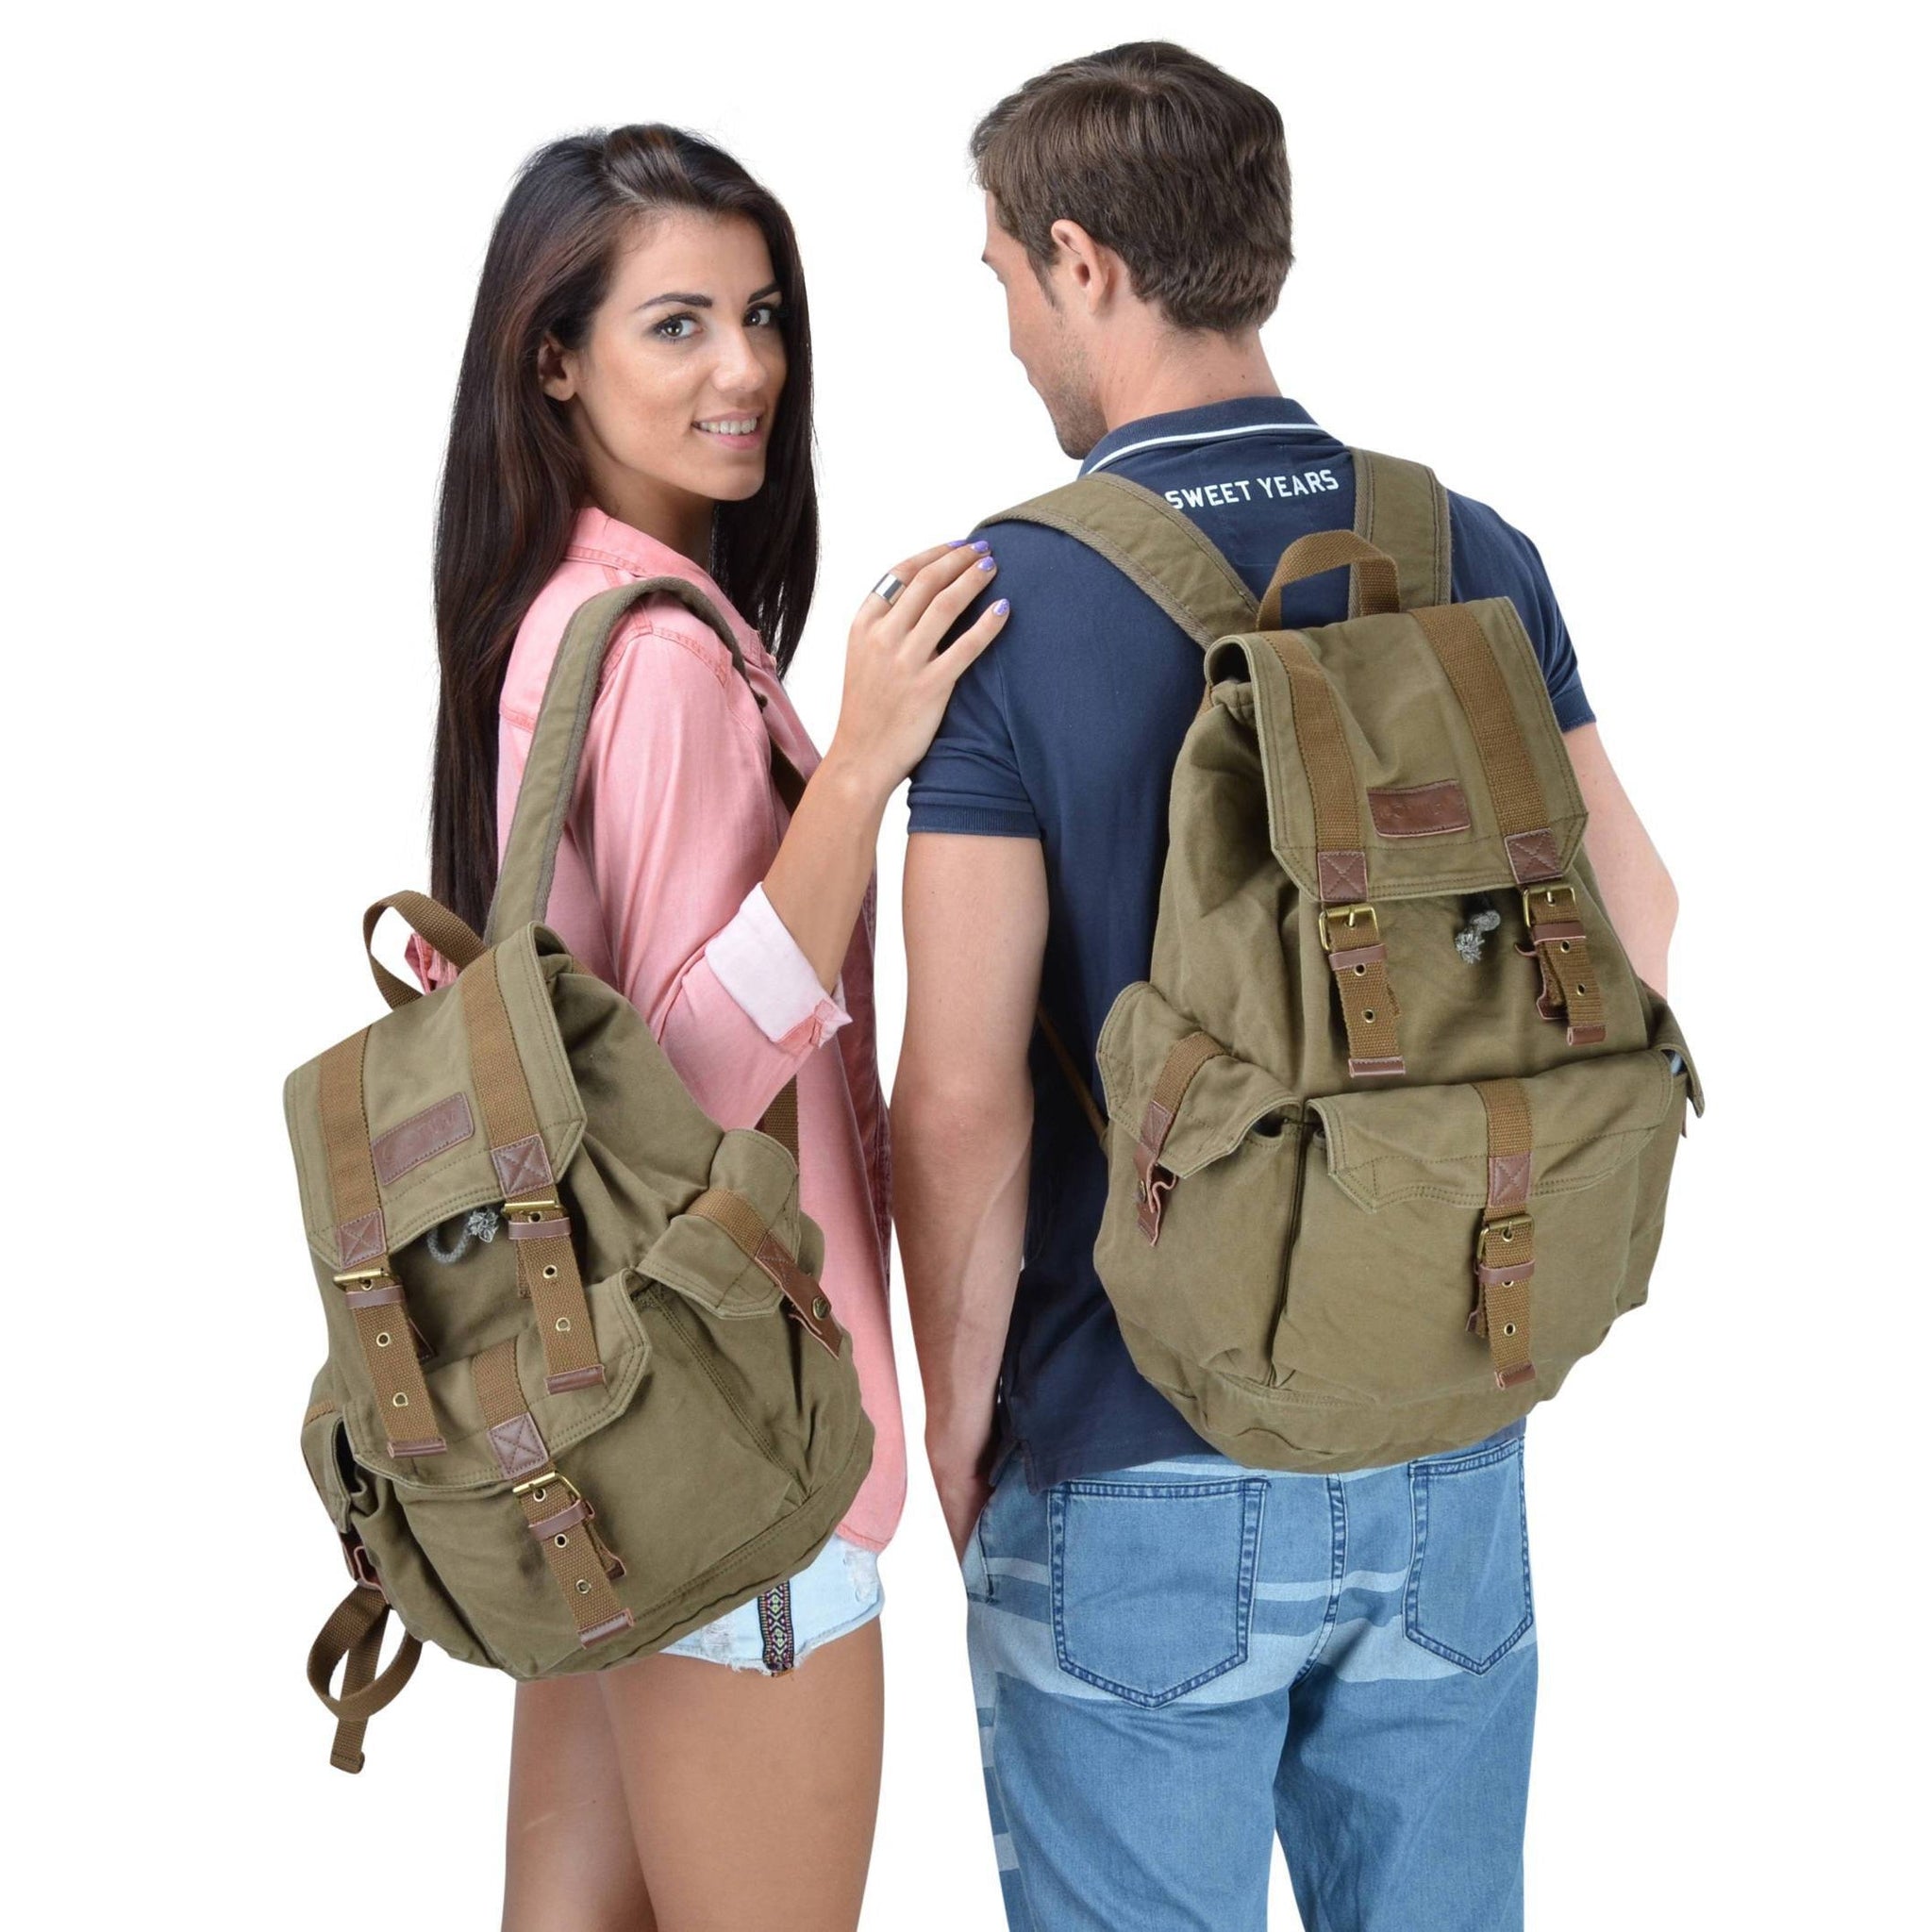 Gootium 21101 Specially High Density Thick Canvas Backpack Rucksack